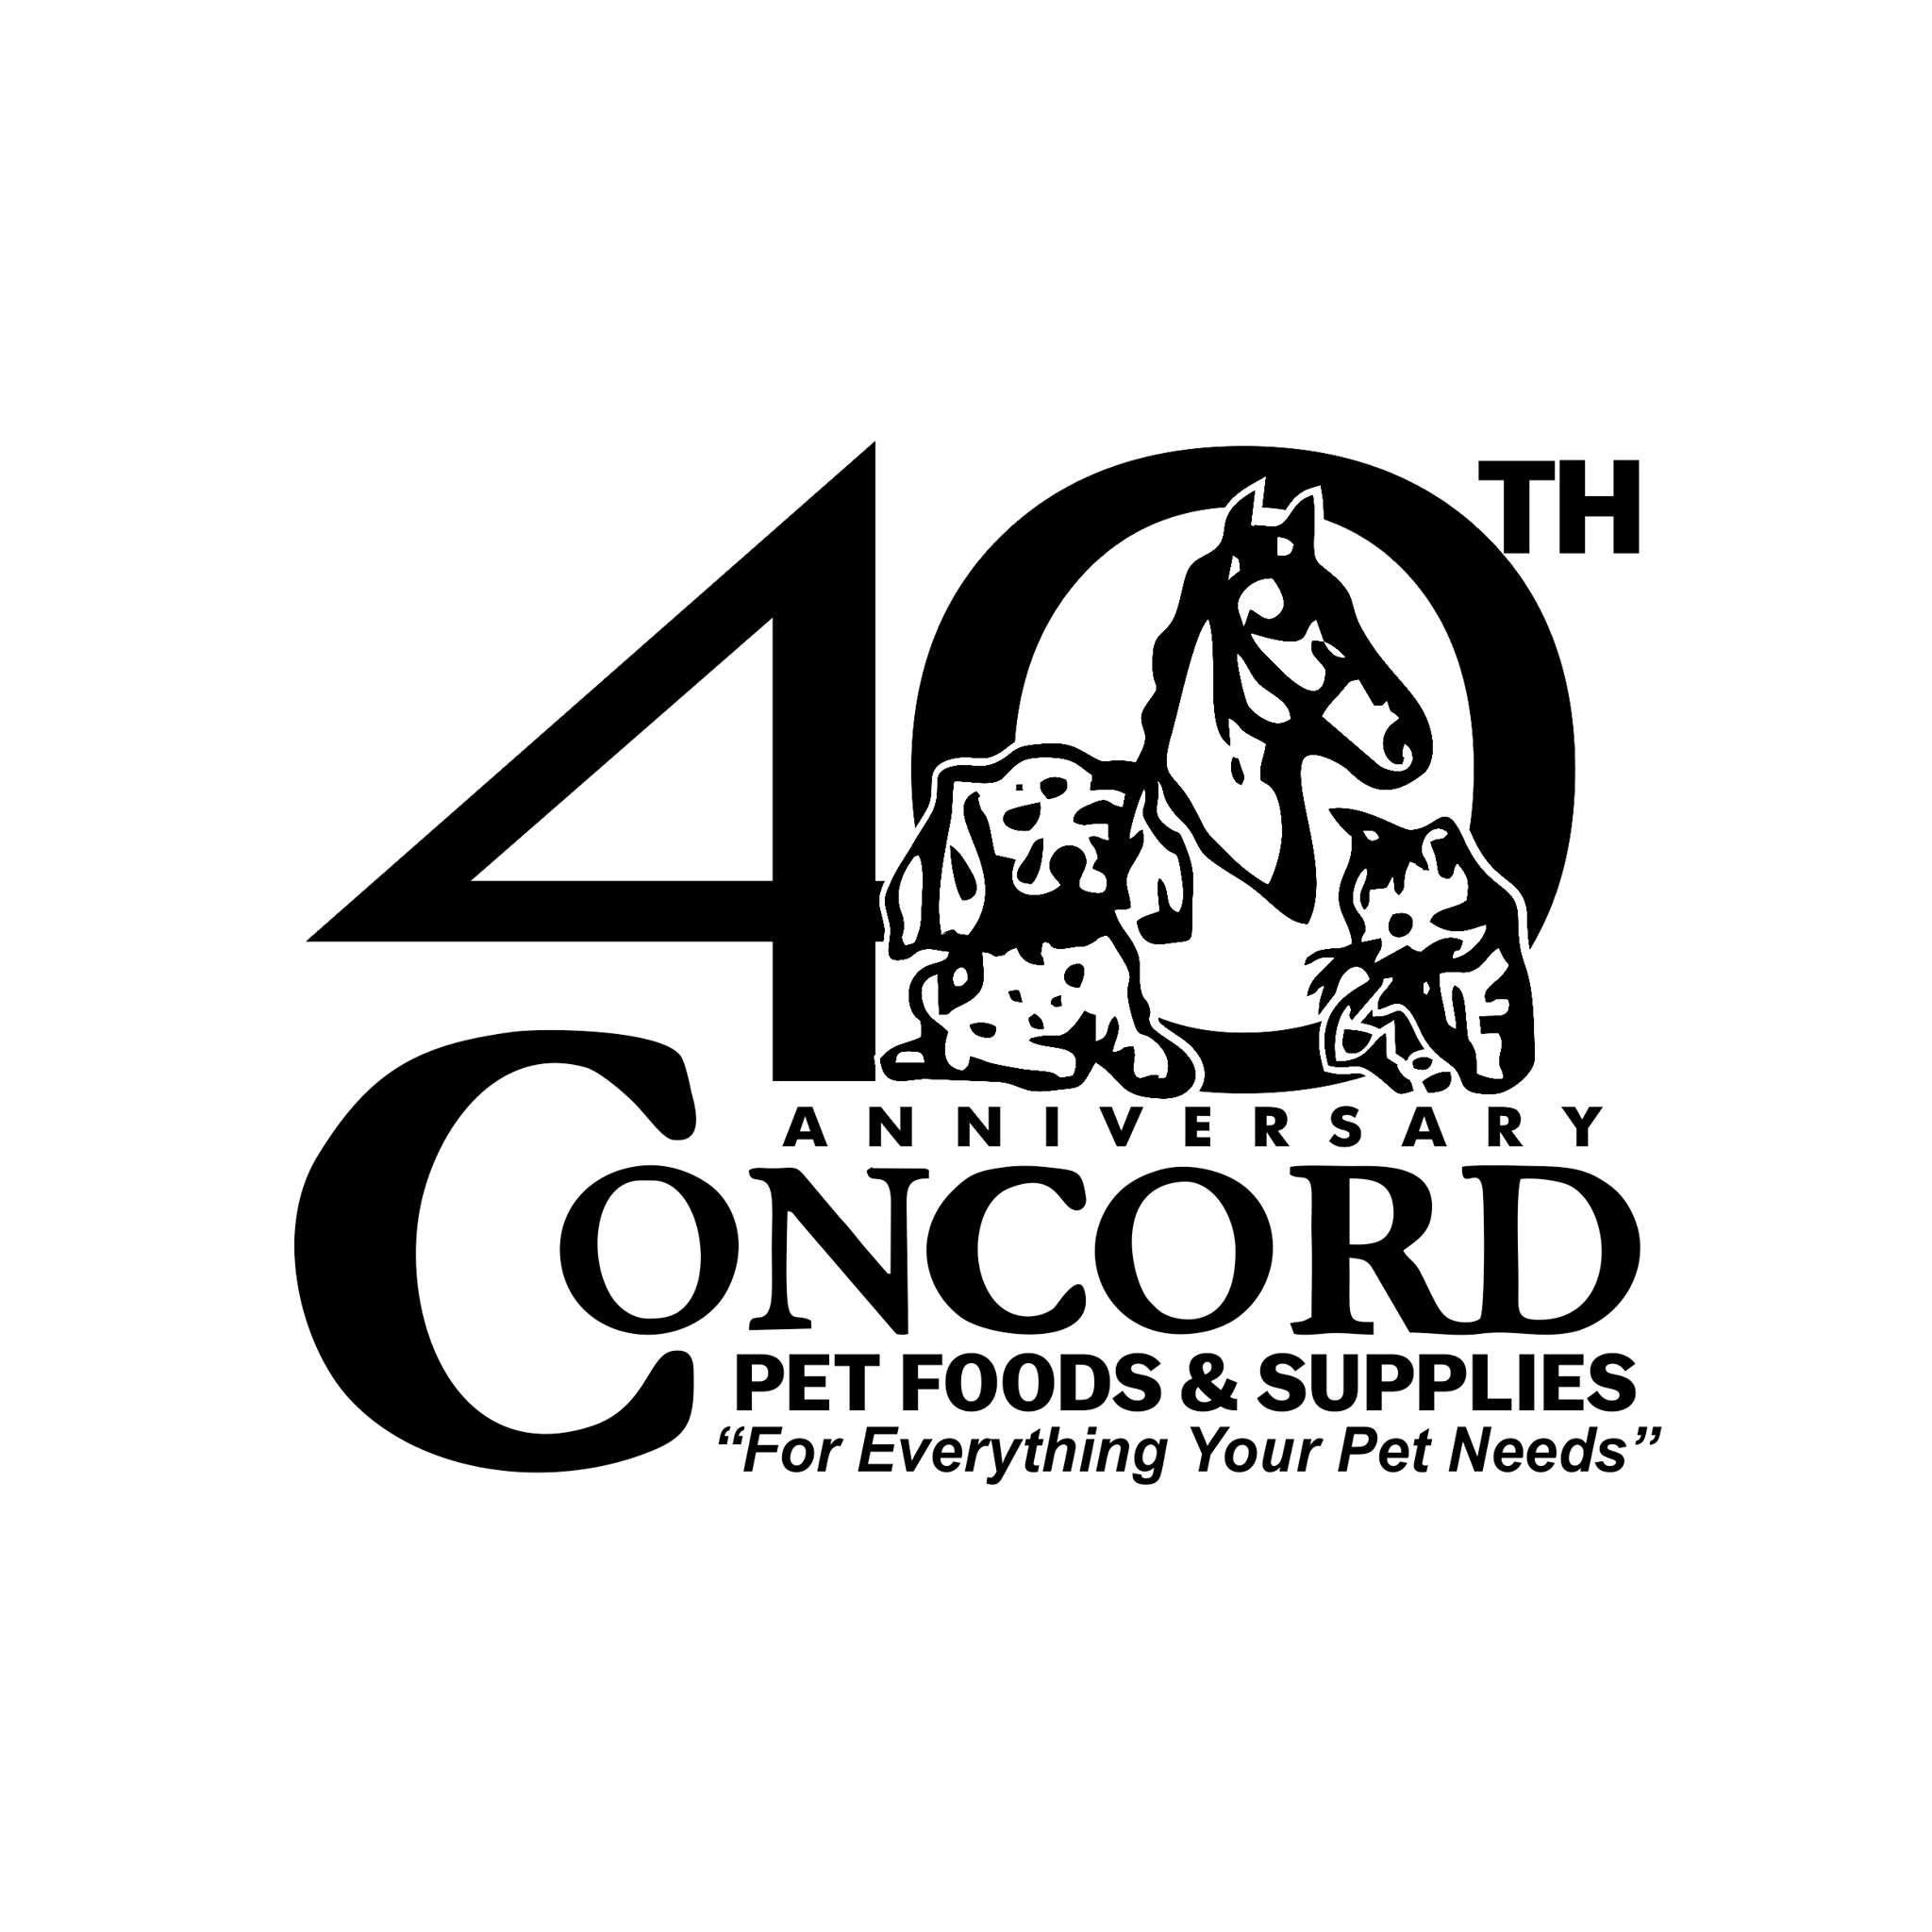 Business logo of Concord Pet Foods & Supplies